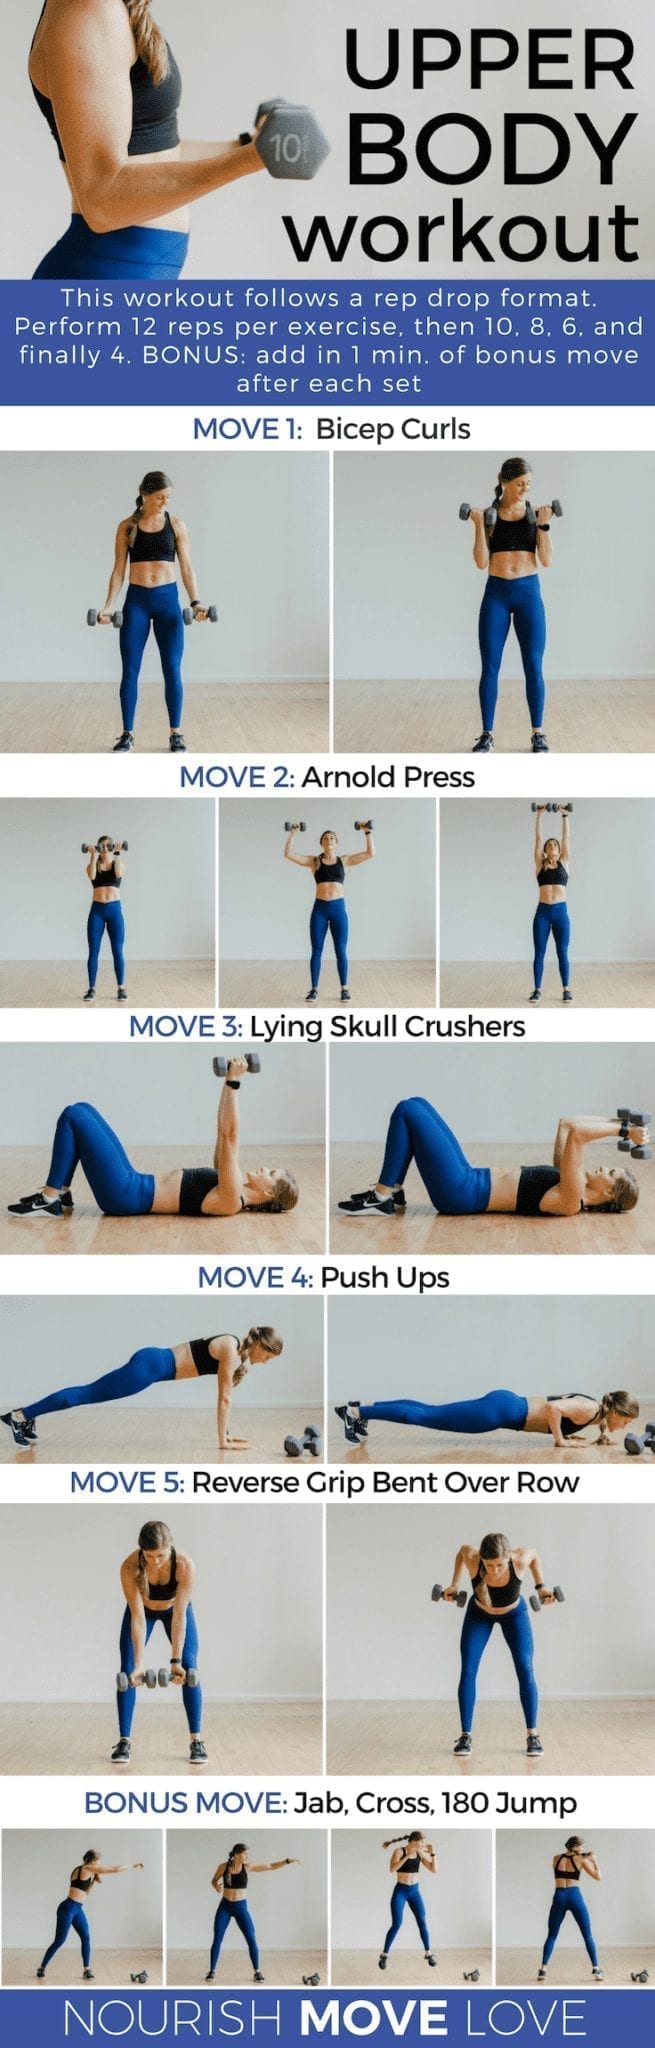 5 Best Upper Body Exercises for Women | Arm Workout ...